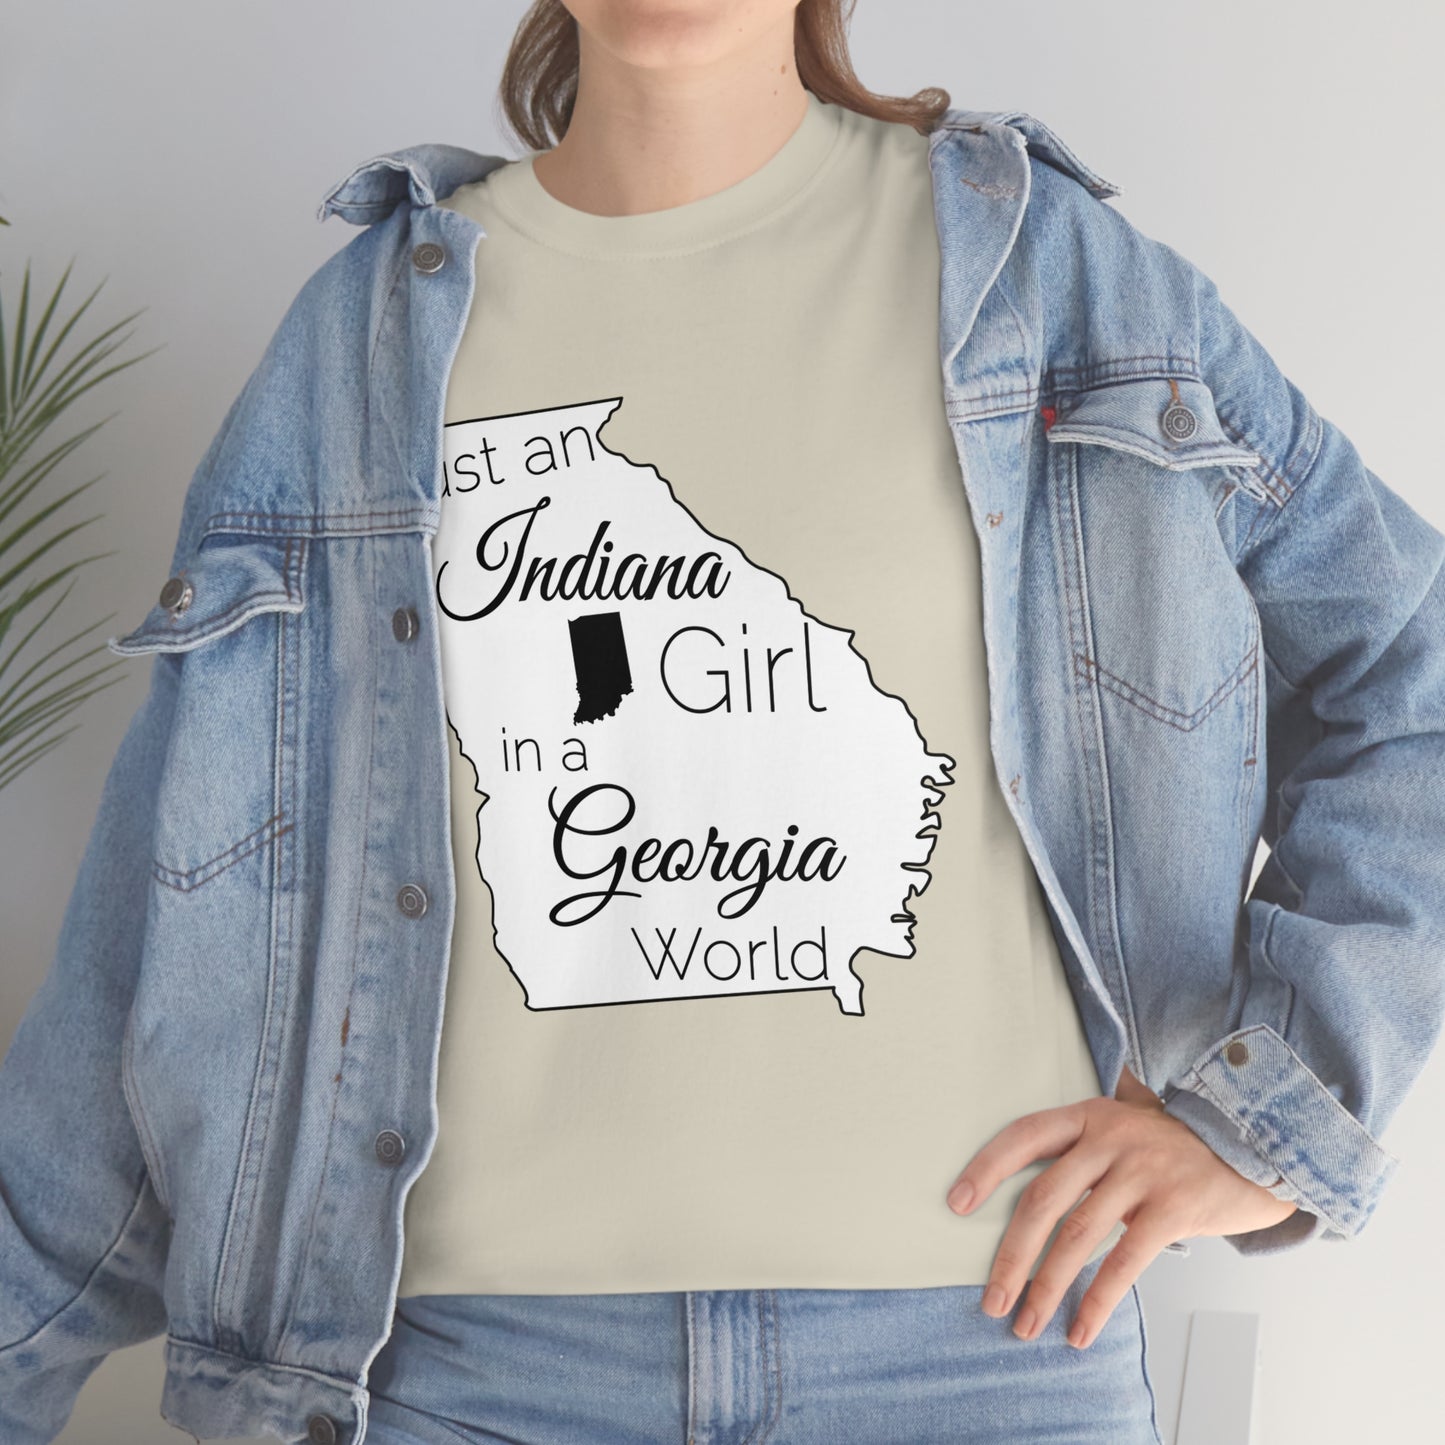 Just an Indiana Girl in a Georgia World Unisex Heavy Cotton Tee